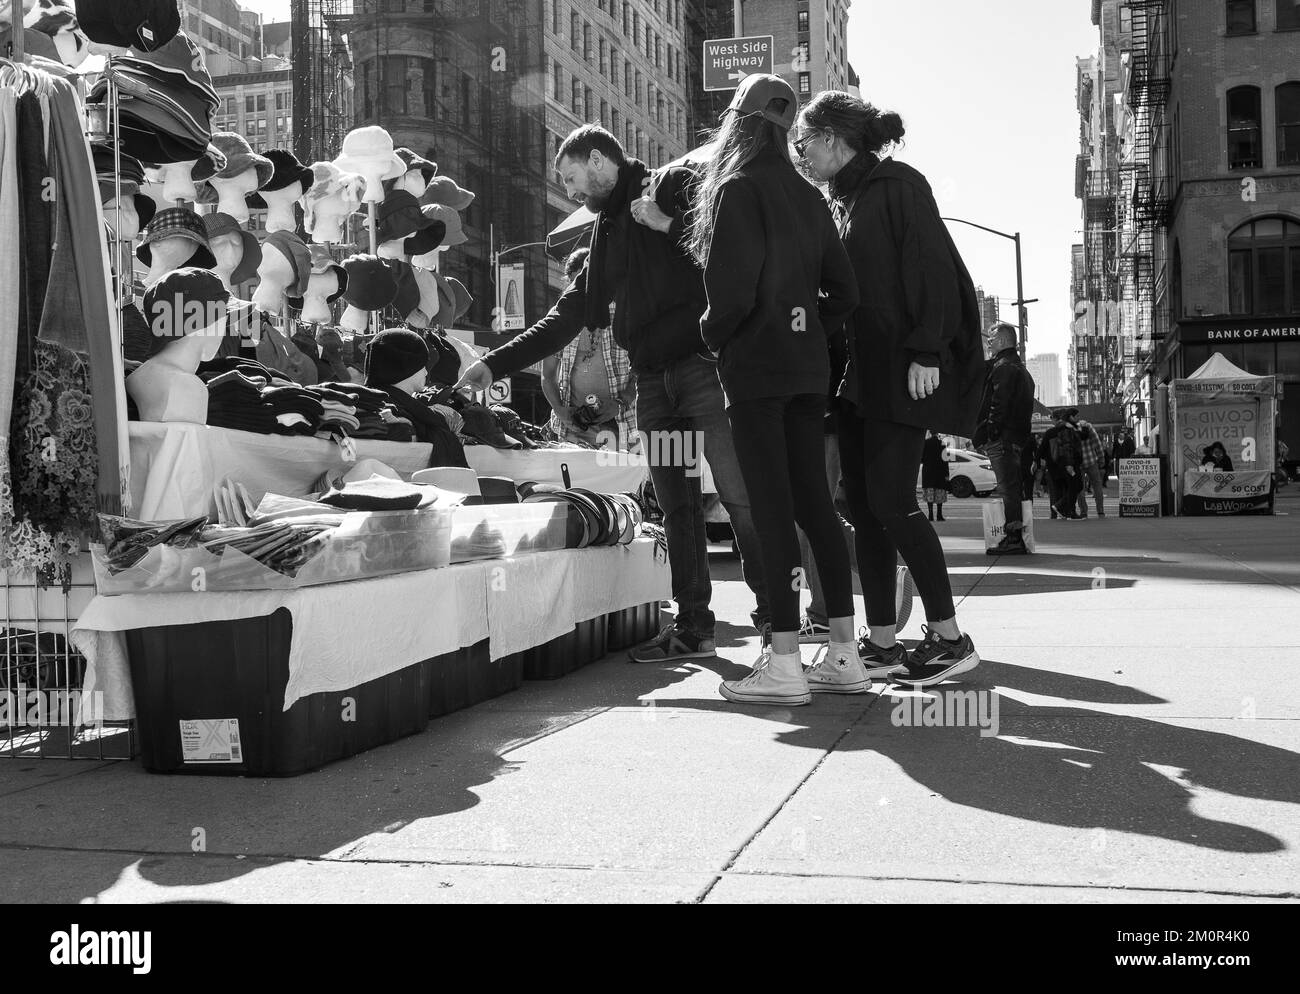 Group of young people buying caps and hats from street vendor on the sidewalk in Manhattan, New York City. Black and white street photography. Stock Photo